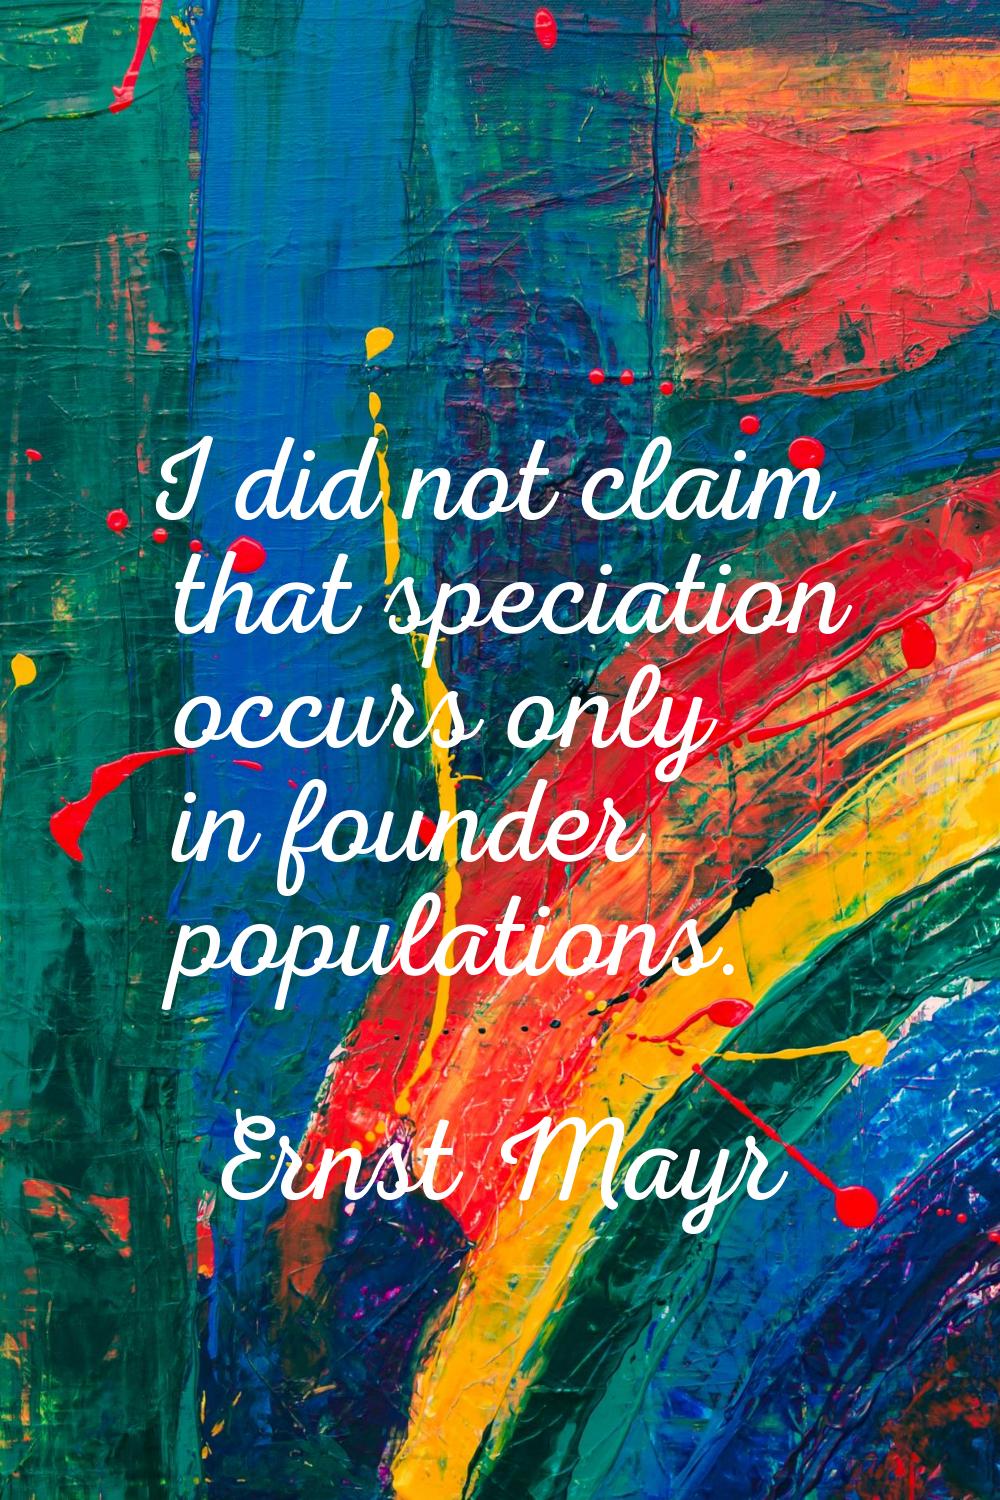 I did not claim that speciation occurs only in founder populations.